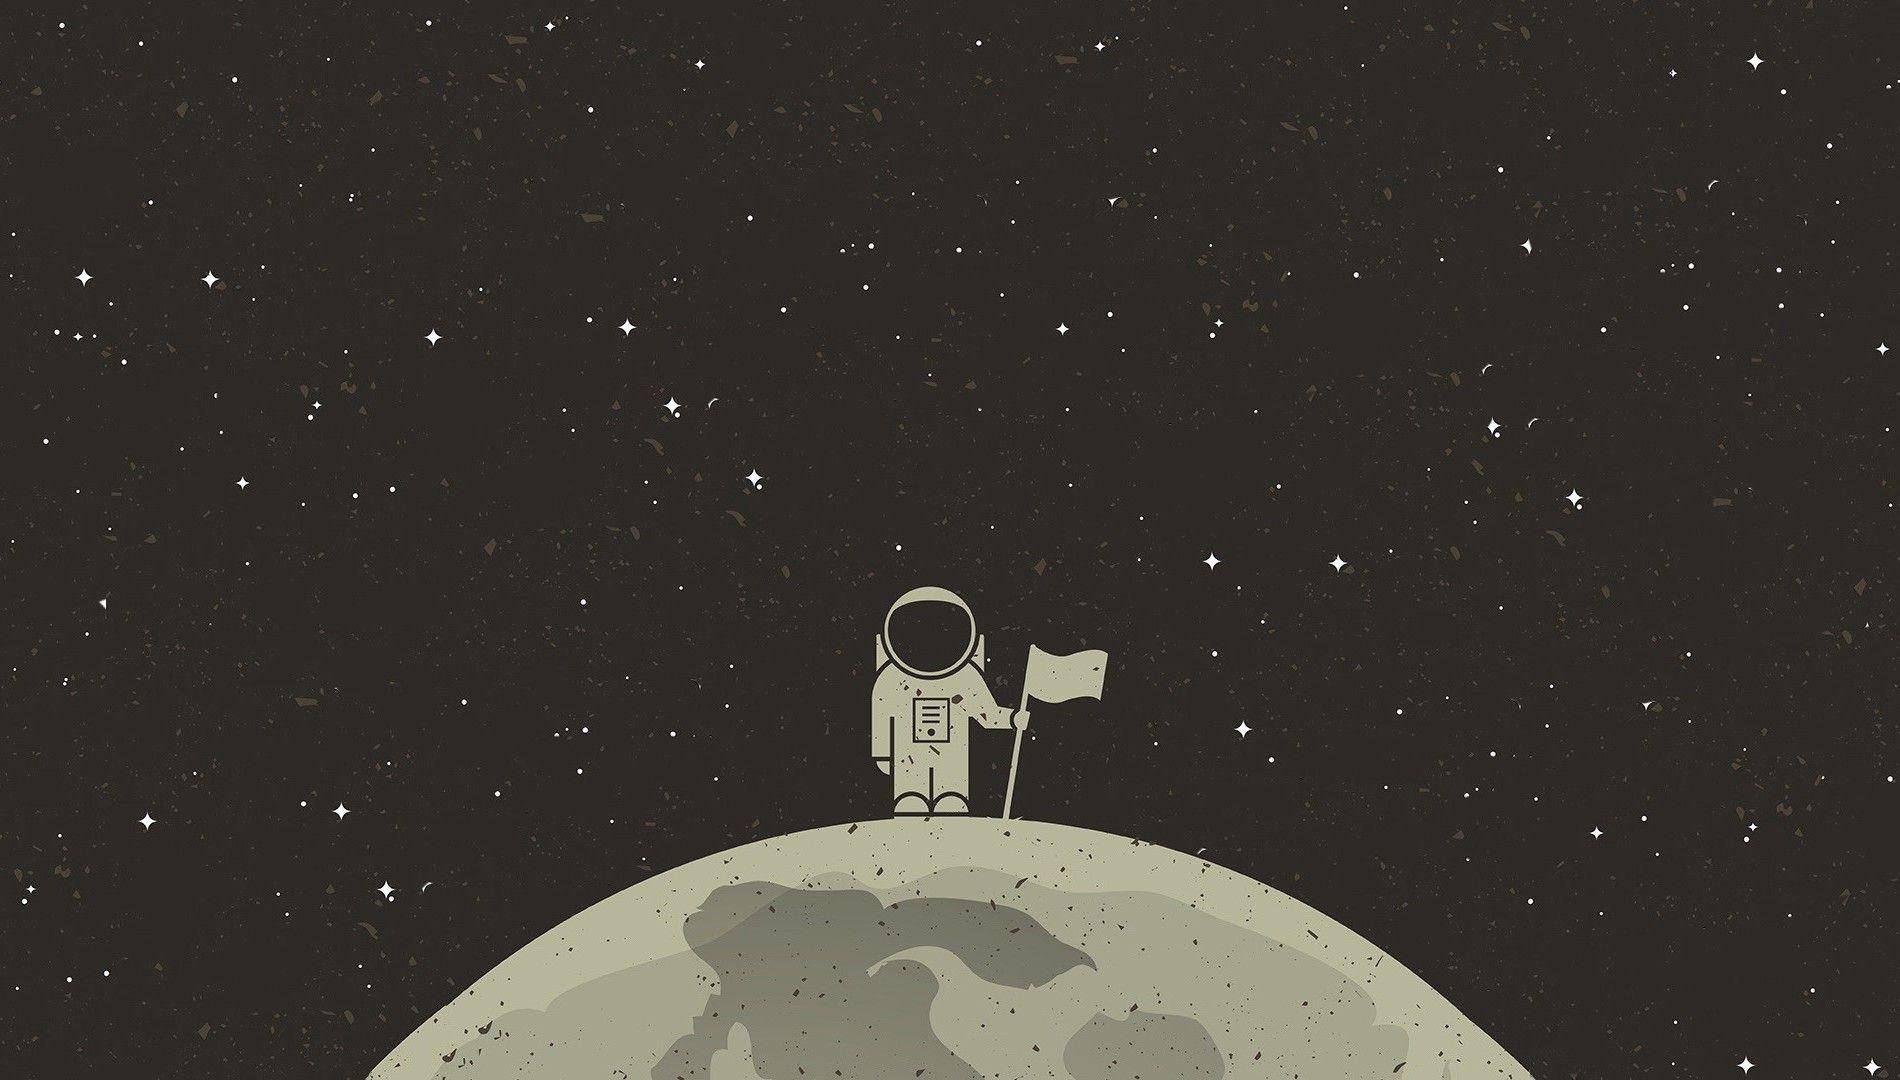 Wallpaper, 1900x1080 px, astronaut, flag, simple background, space